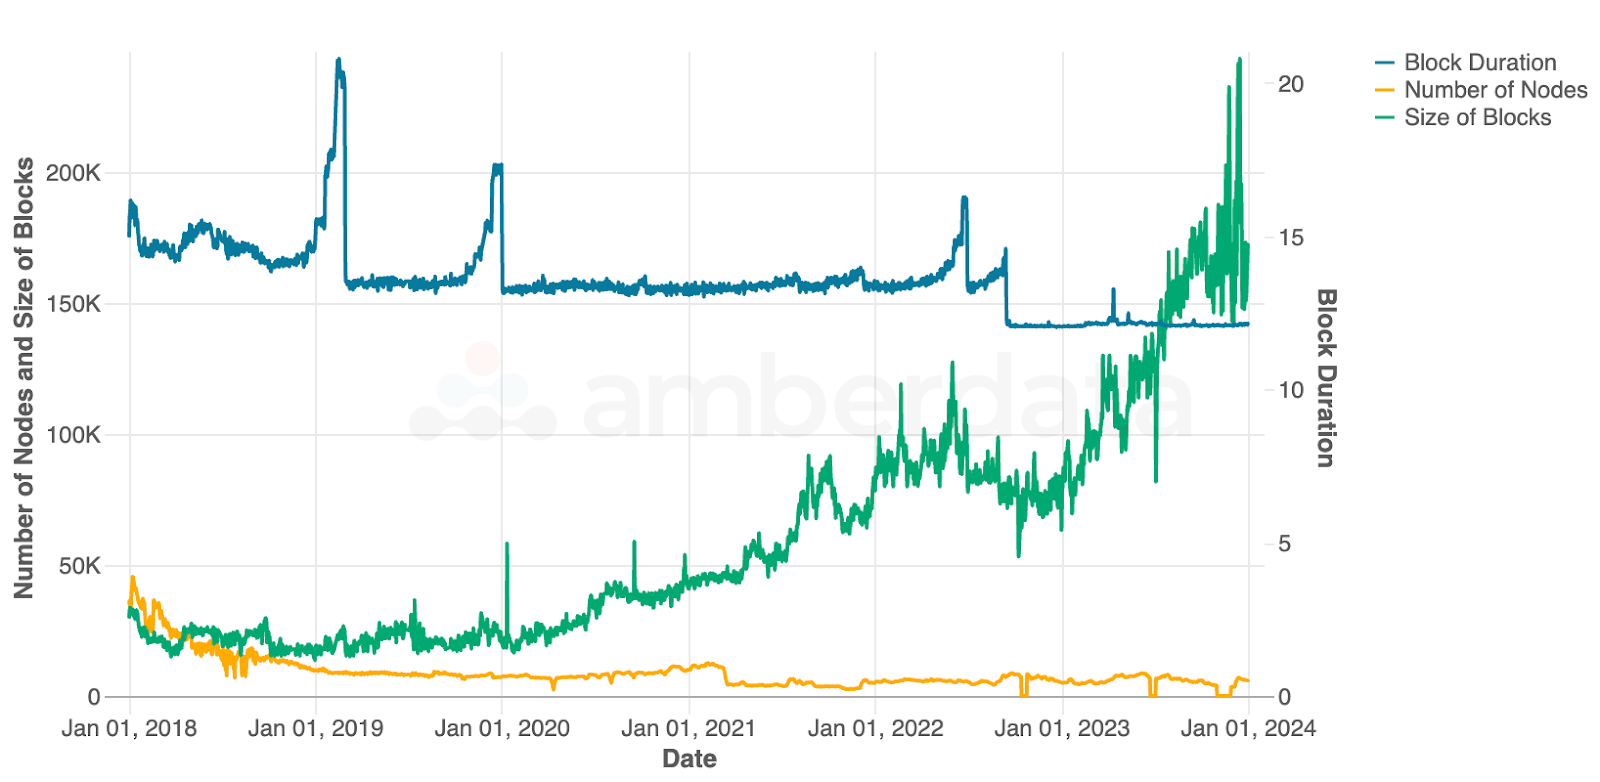 Amberdata API Daily Ethereum block duration, number of nodes, and size of blocks since Jan 2018